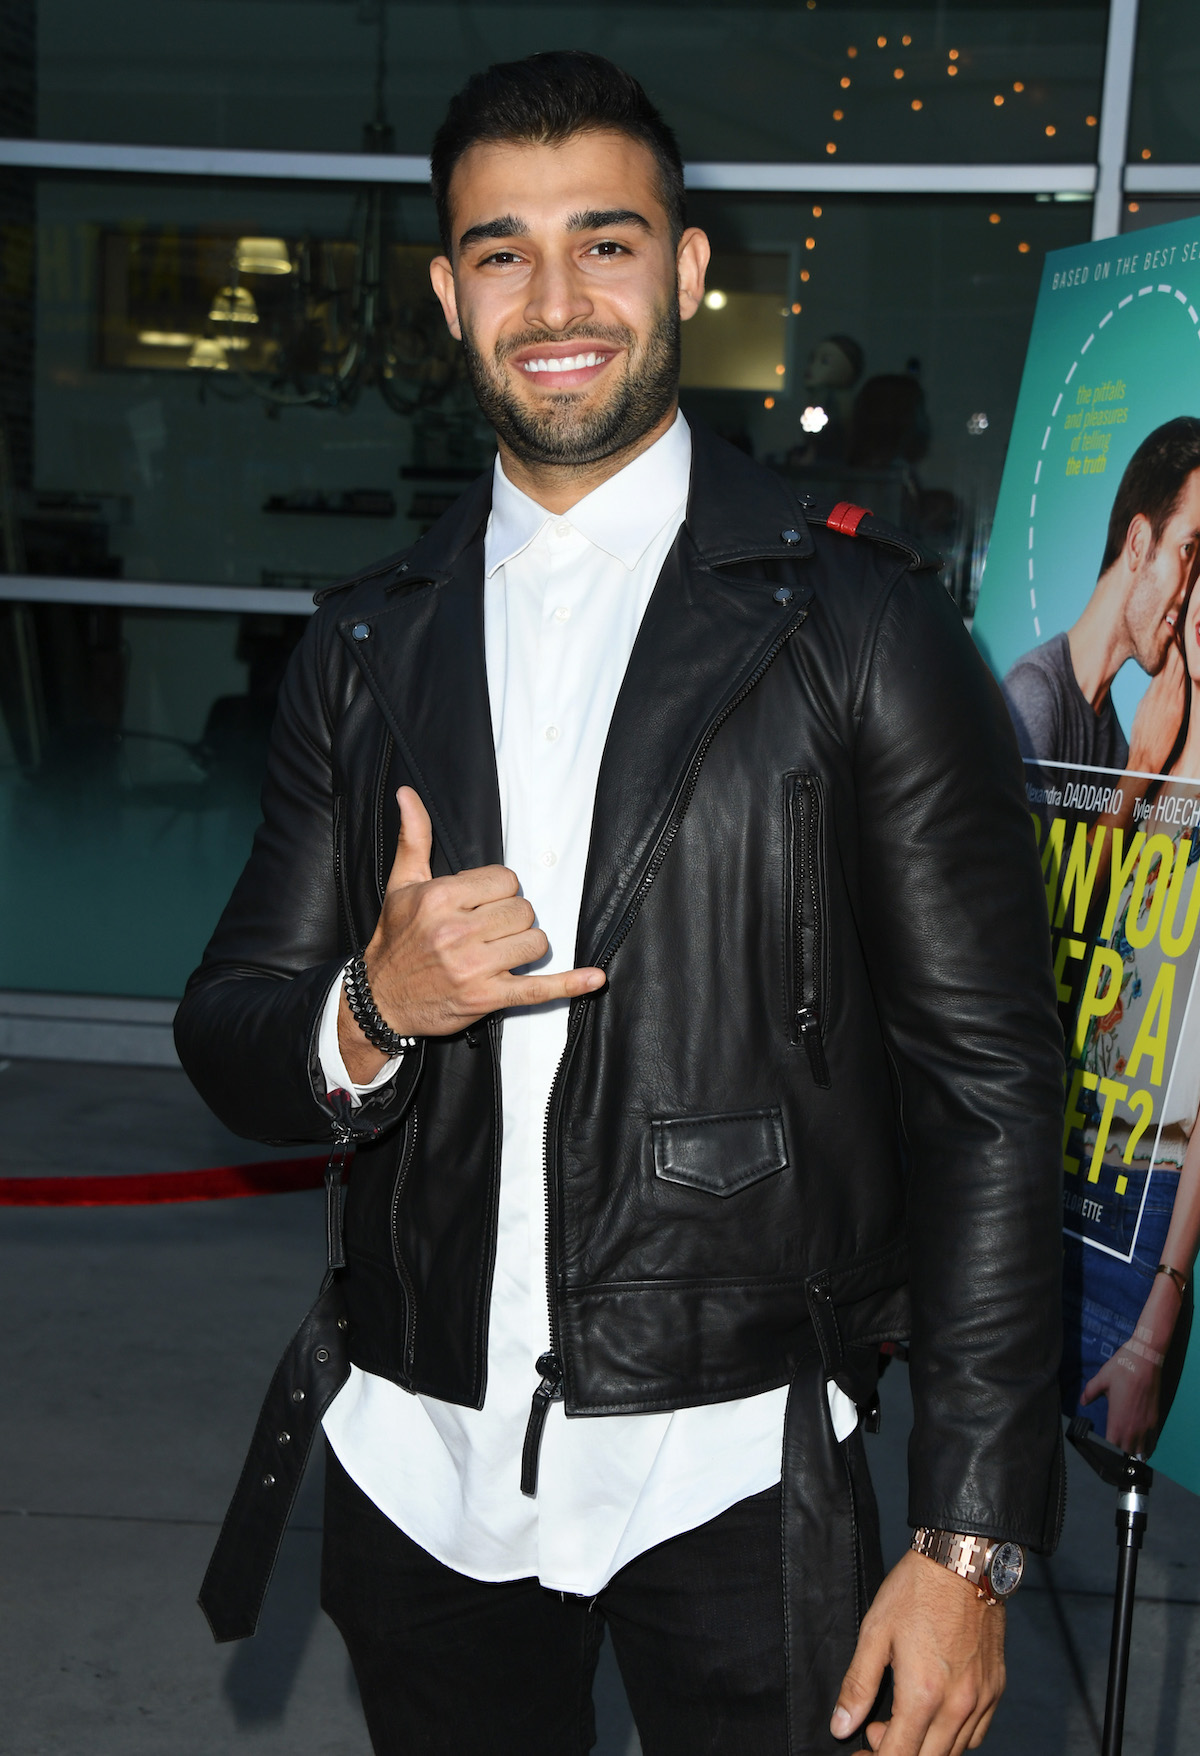 Sam Asghari flashes the hang loose sign with one hand while wearing a black leather jacket and smiling.